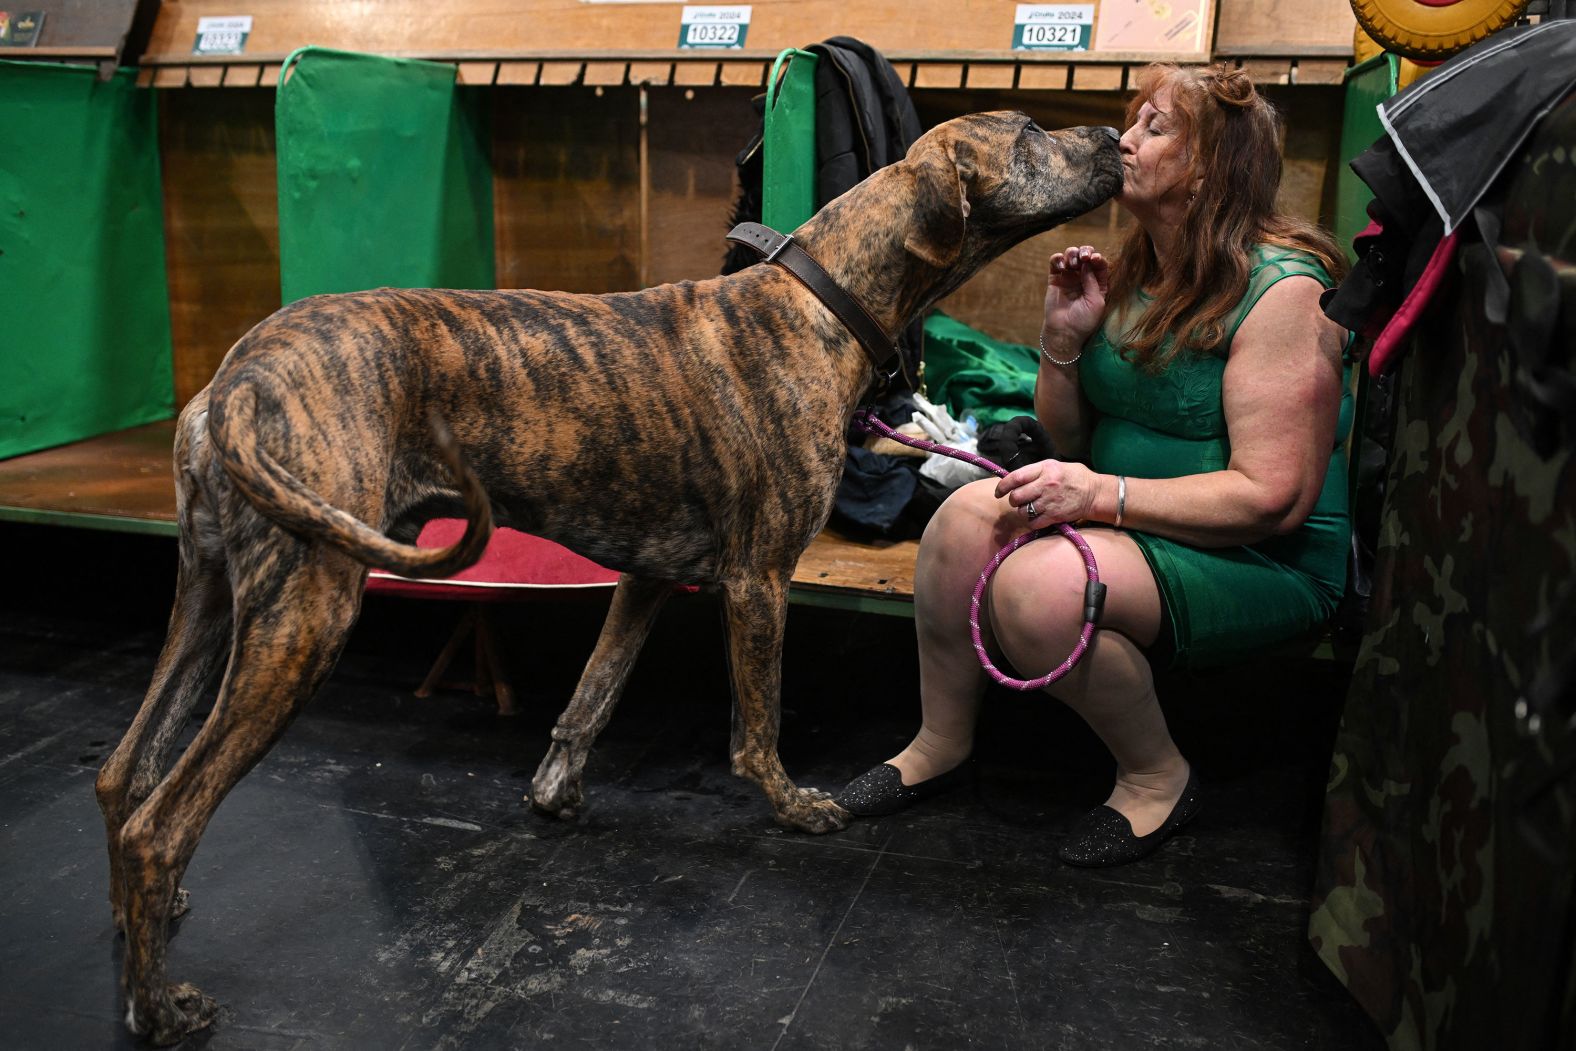 A Great Dane kisses its handler during the Crufts dog show in Birmingham, England, on Saturday, March 9.